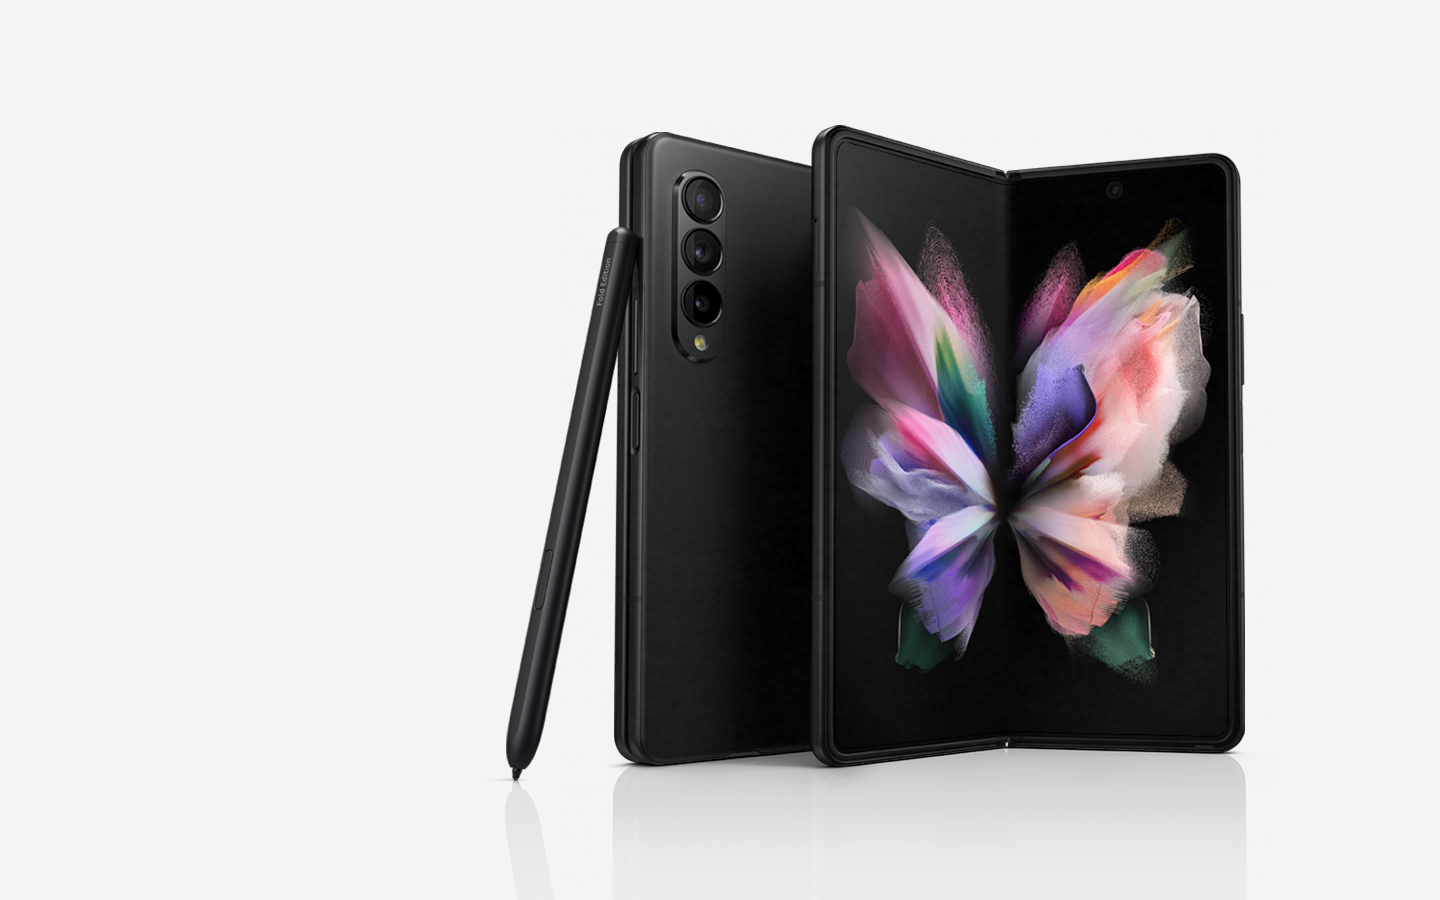 Two Galaxy Z Fold3 5G phones, one seen folded from the Back Cover and one seen unfolded with a colorful wallpaper on the Main Screen. The S Pen Fold Edition leans against the folded phone.